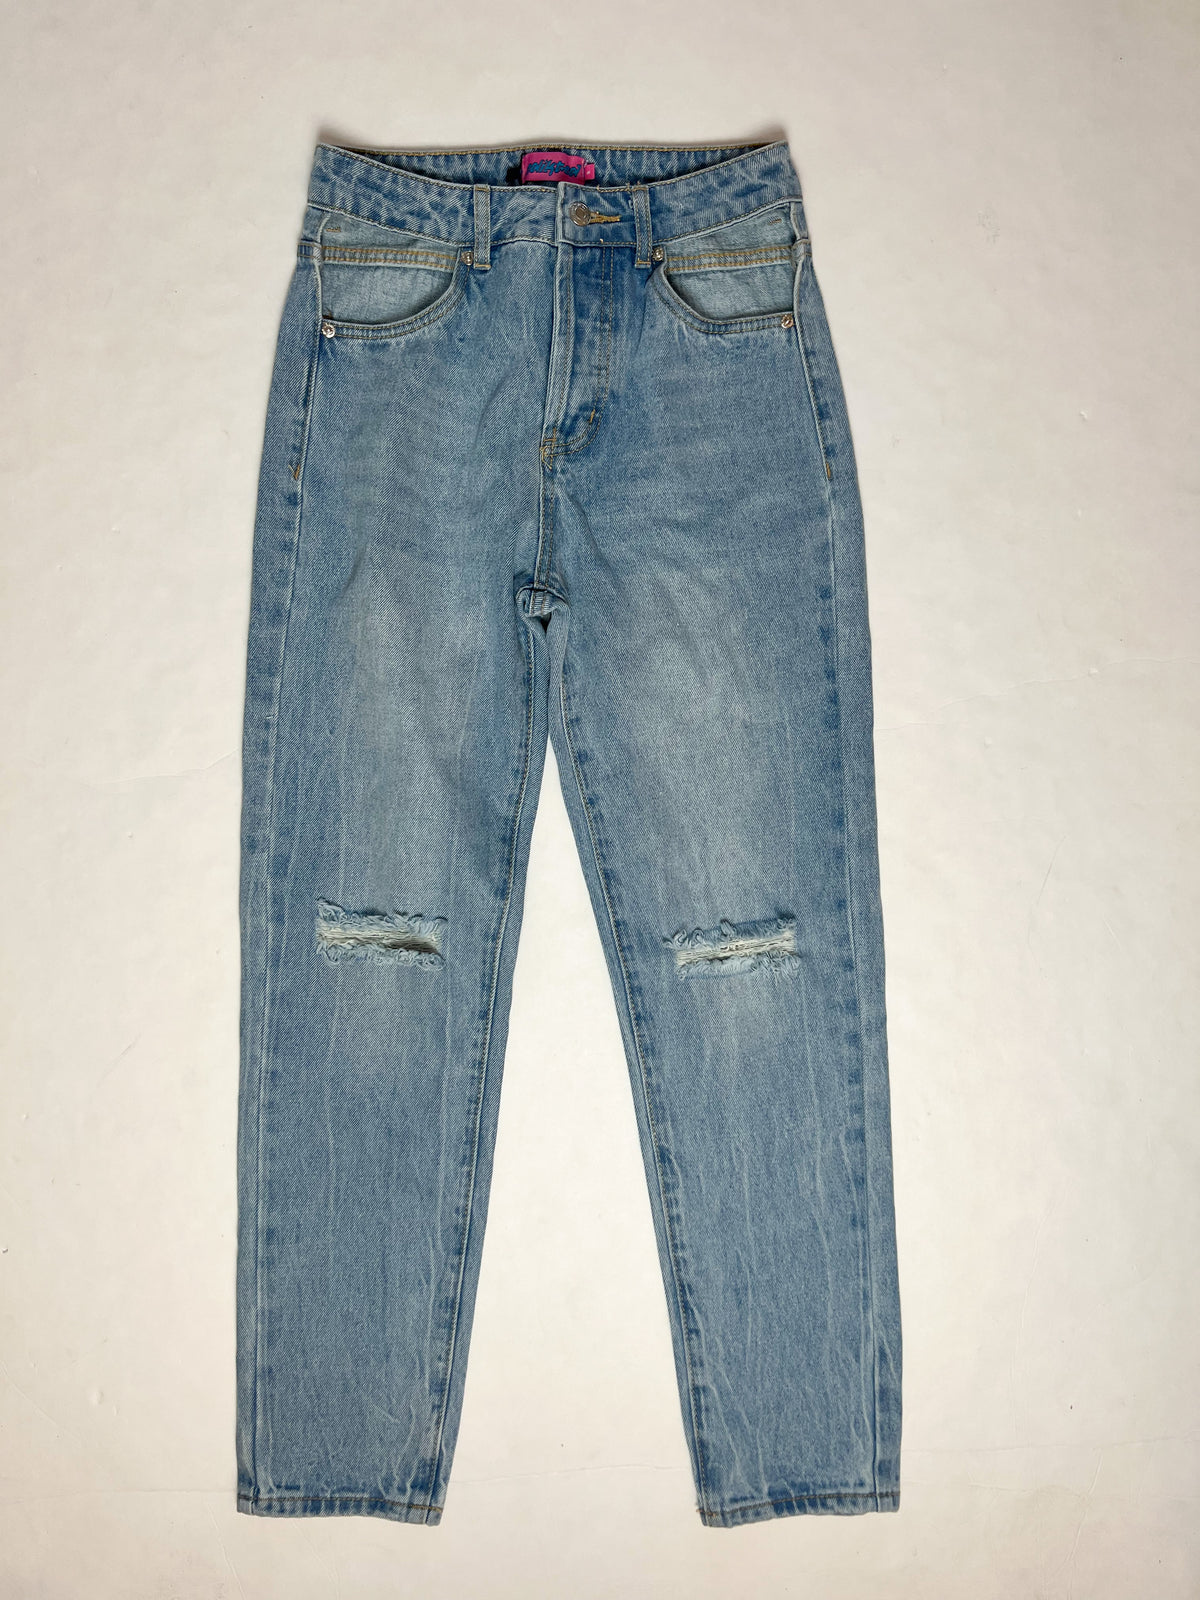 Edikted High Rise Distressed Jeans - NEW WITH TAGS